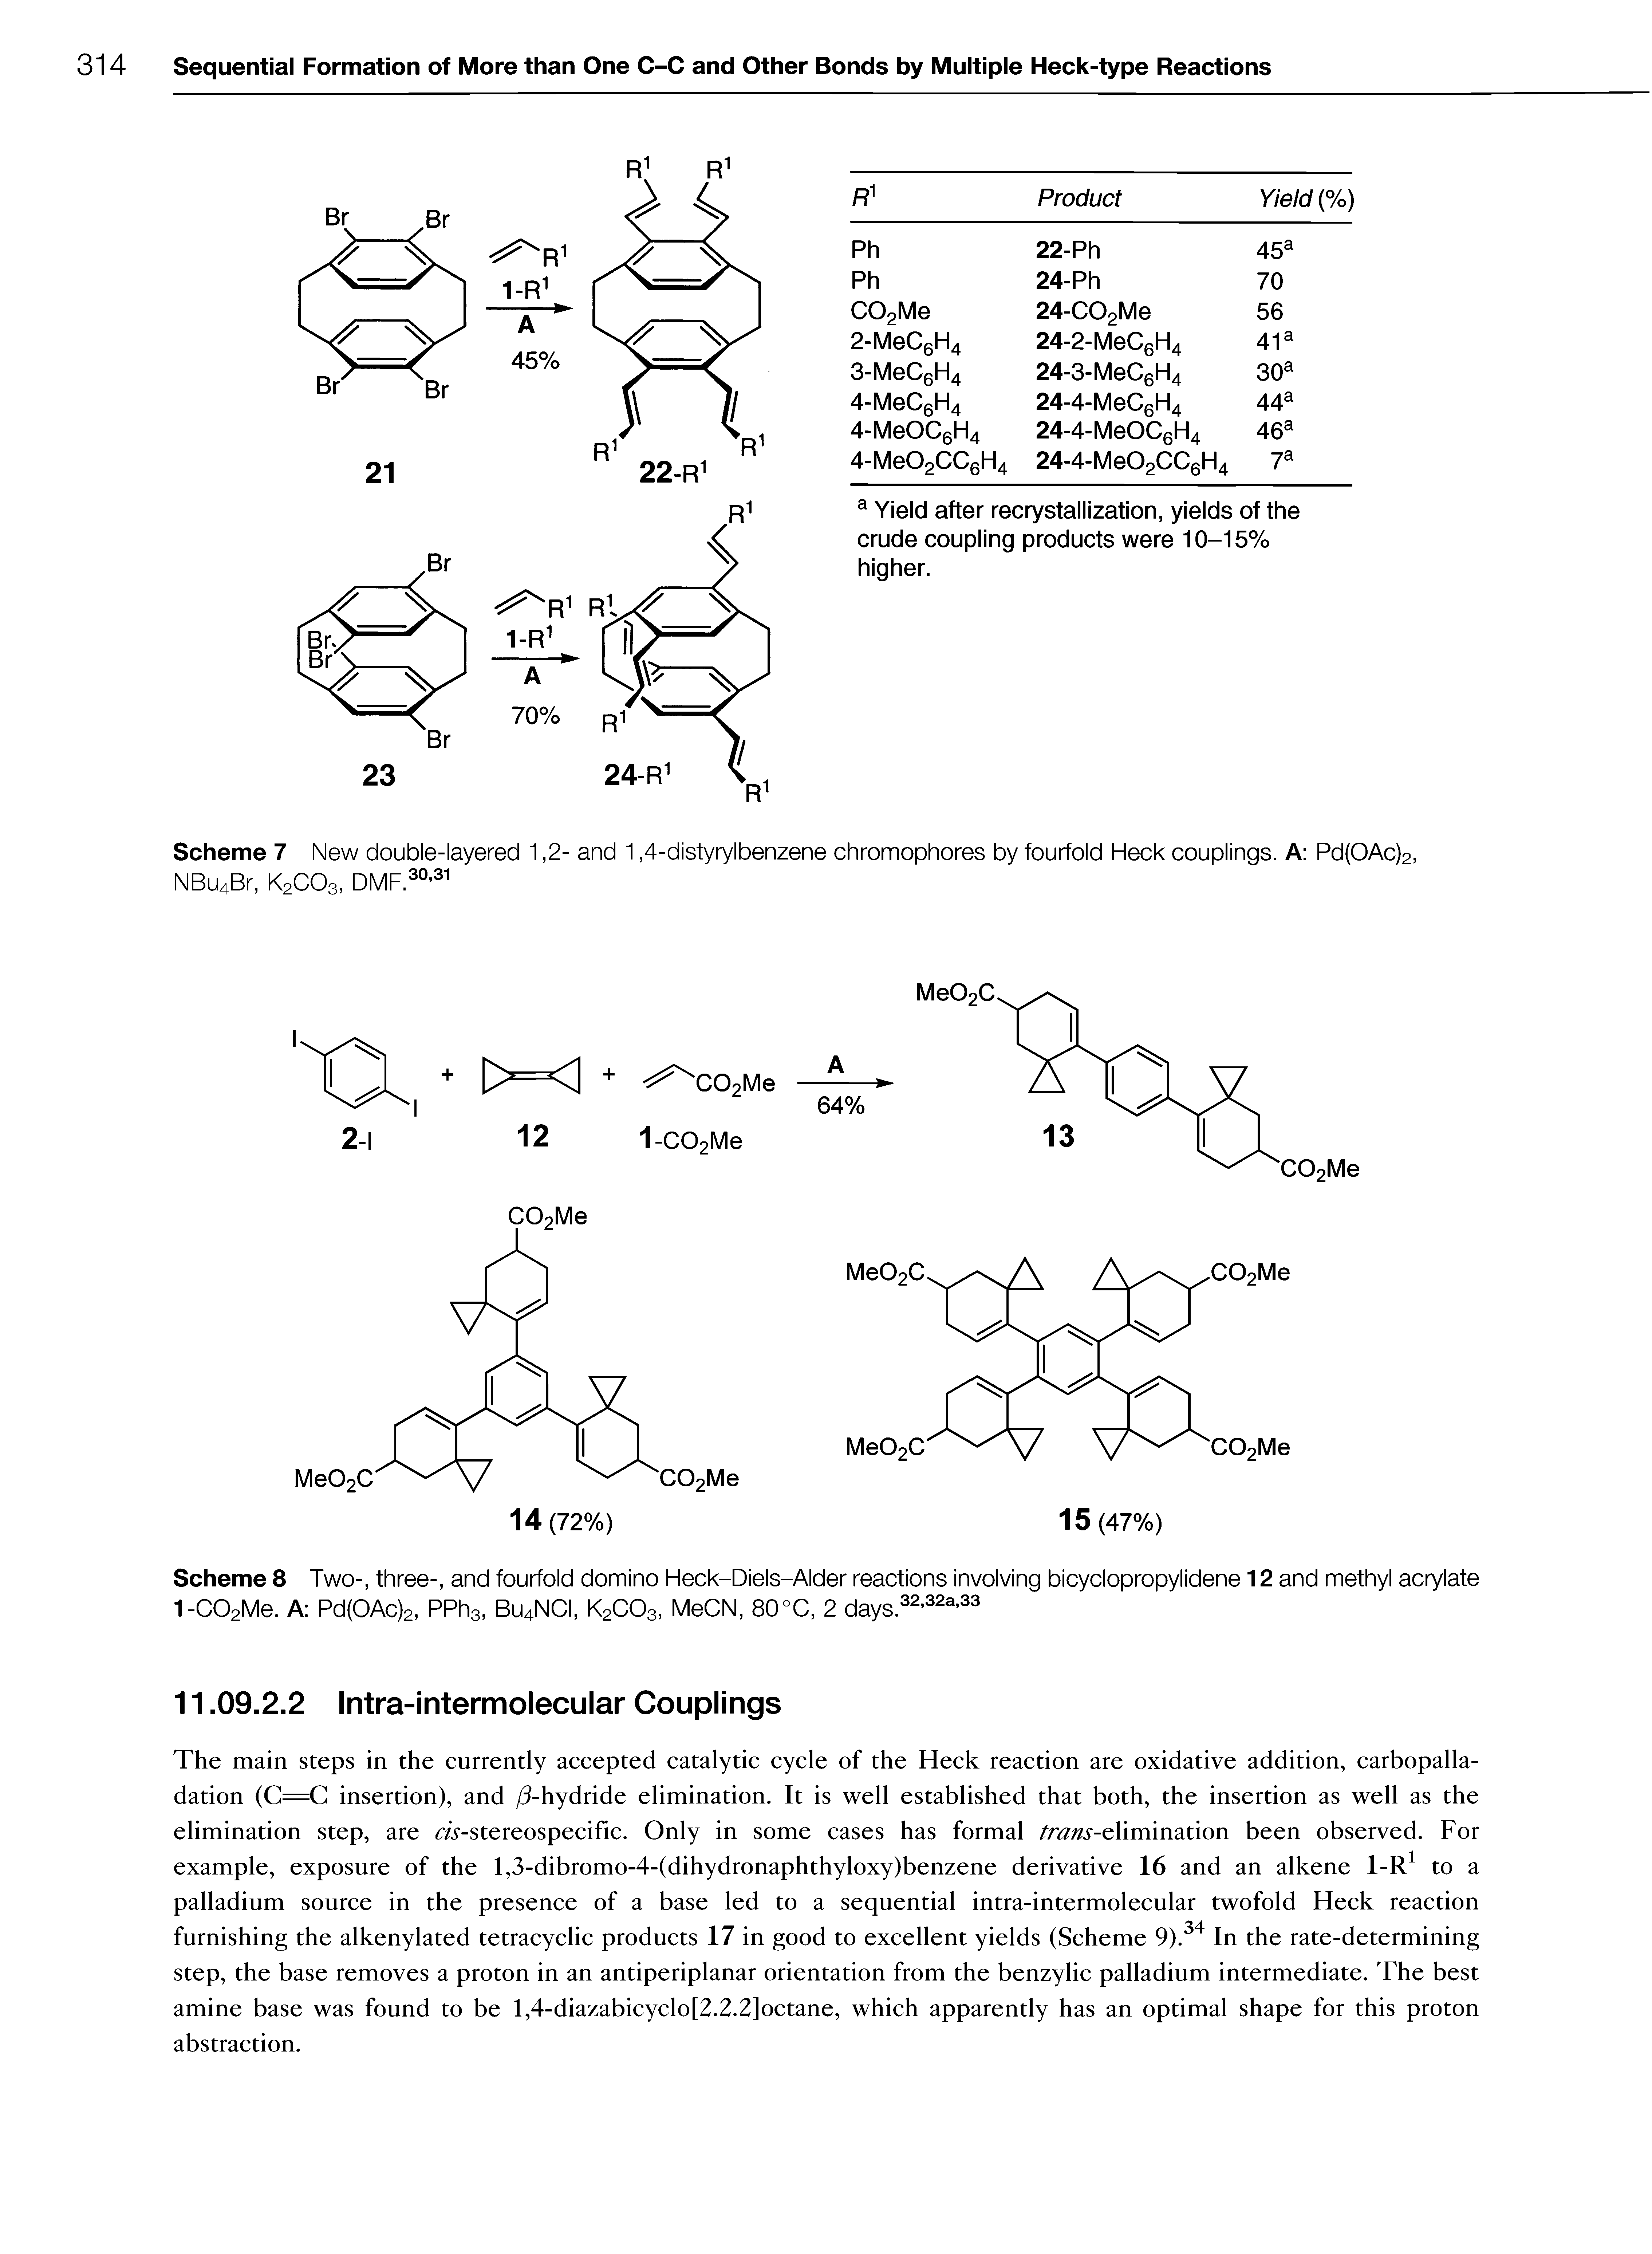 Scheme 7 New double-layered 1,2- and 1,4-distyrylbenzene chromophores by fourfold Heck couplings. A Pd(OAc)2, NBu4Br, K2CO3,...